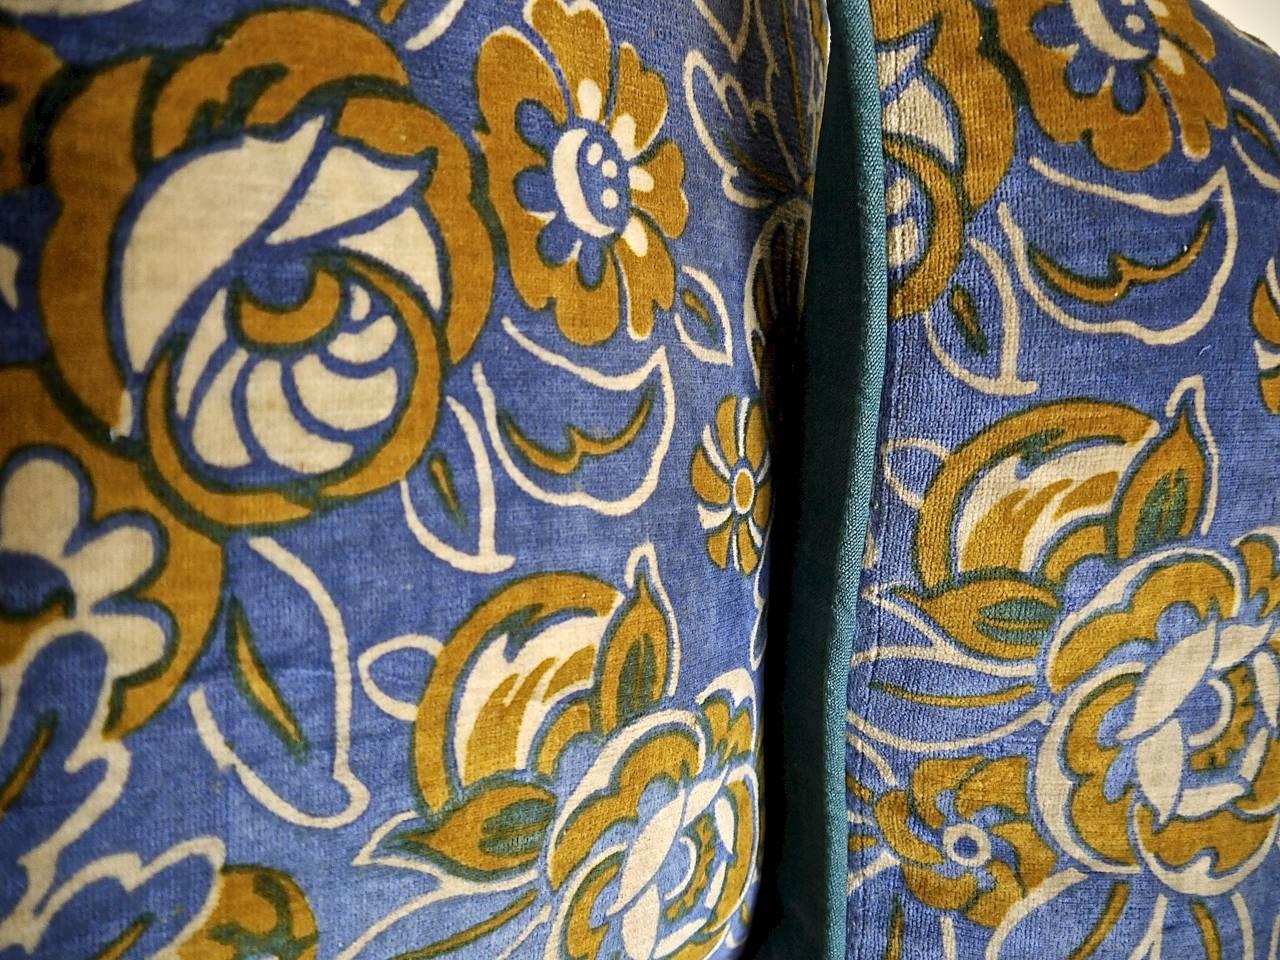 French 1920s Art Deco Tan and Blue Floral Velvet Cushion For Sale 2